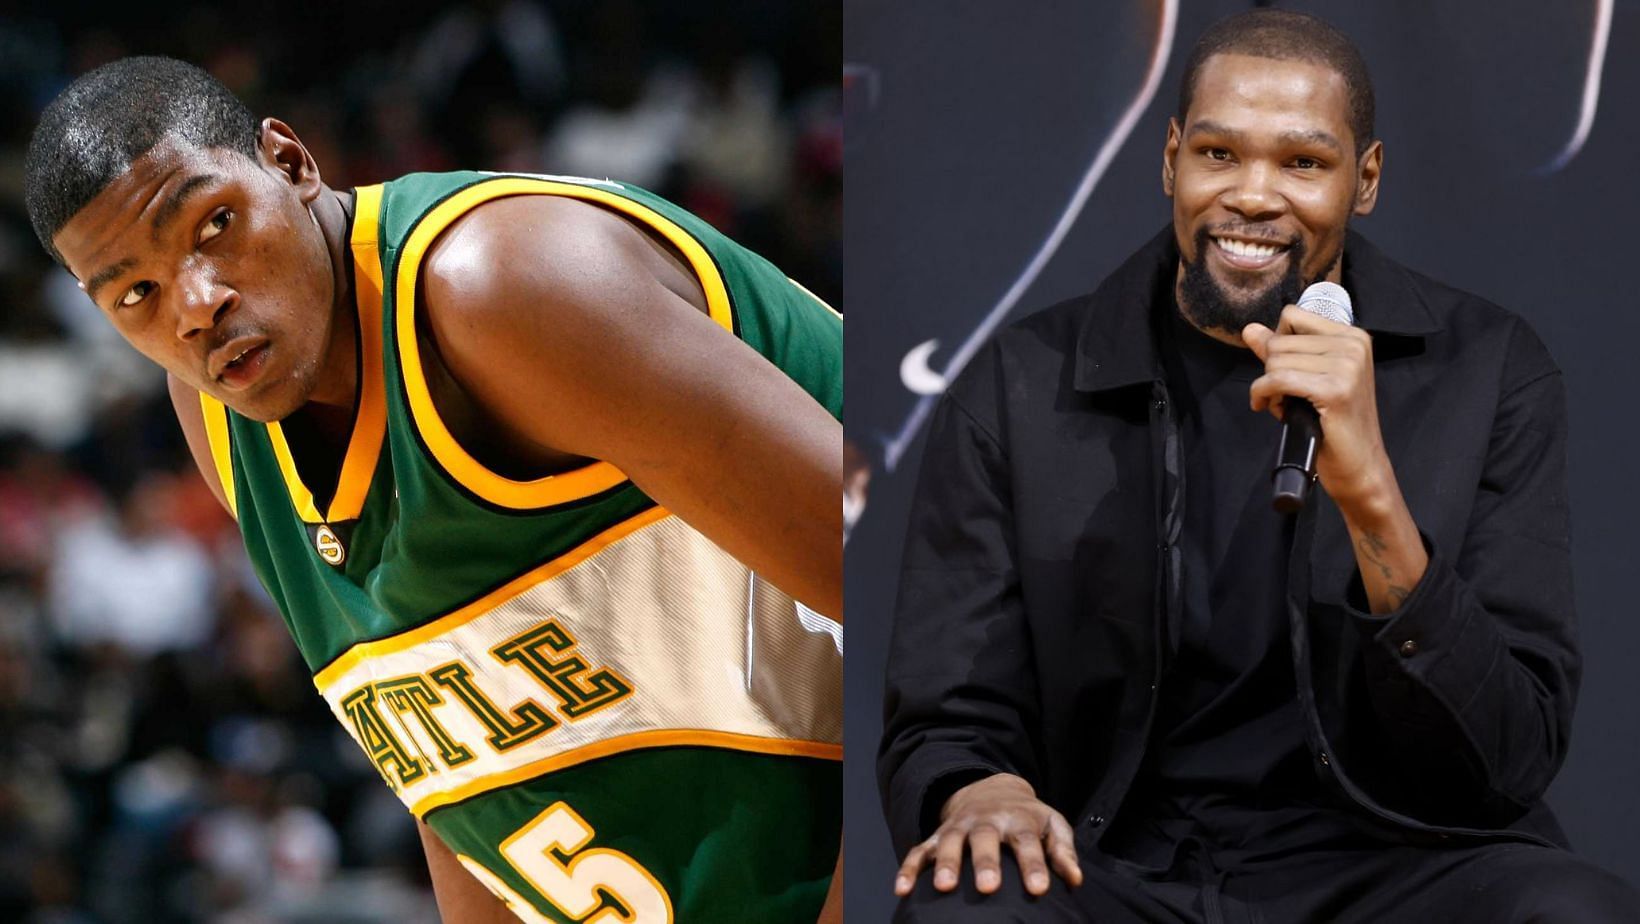 Kevin Durant would love to own a team and bring NBA basketball back to Seattle.